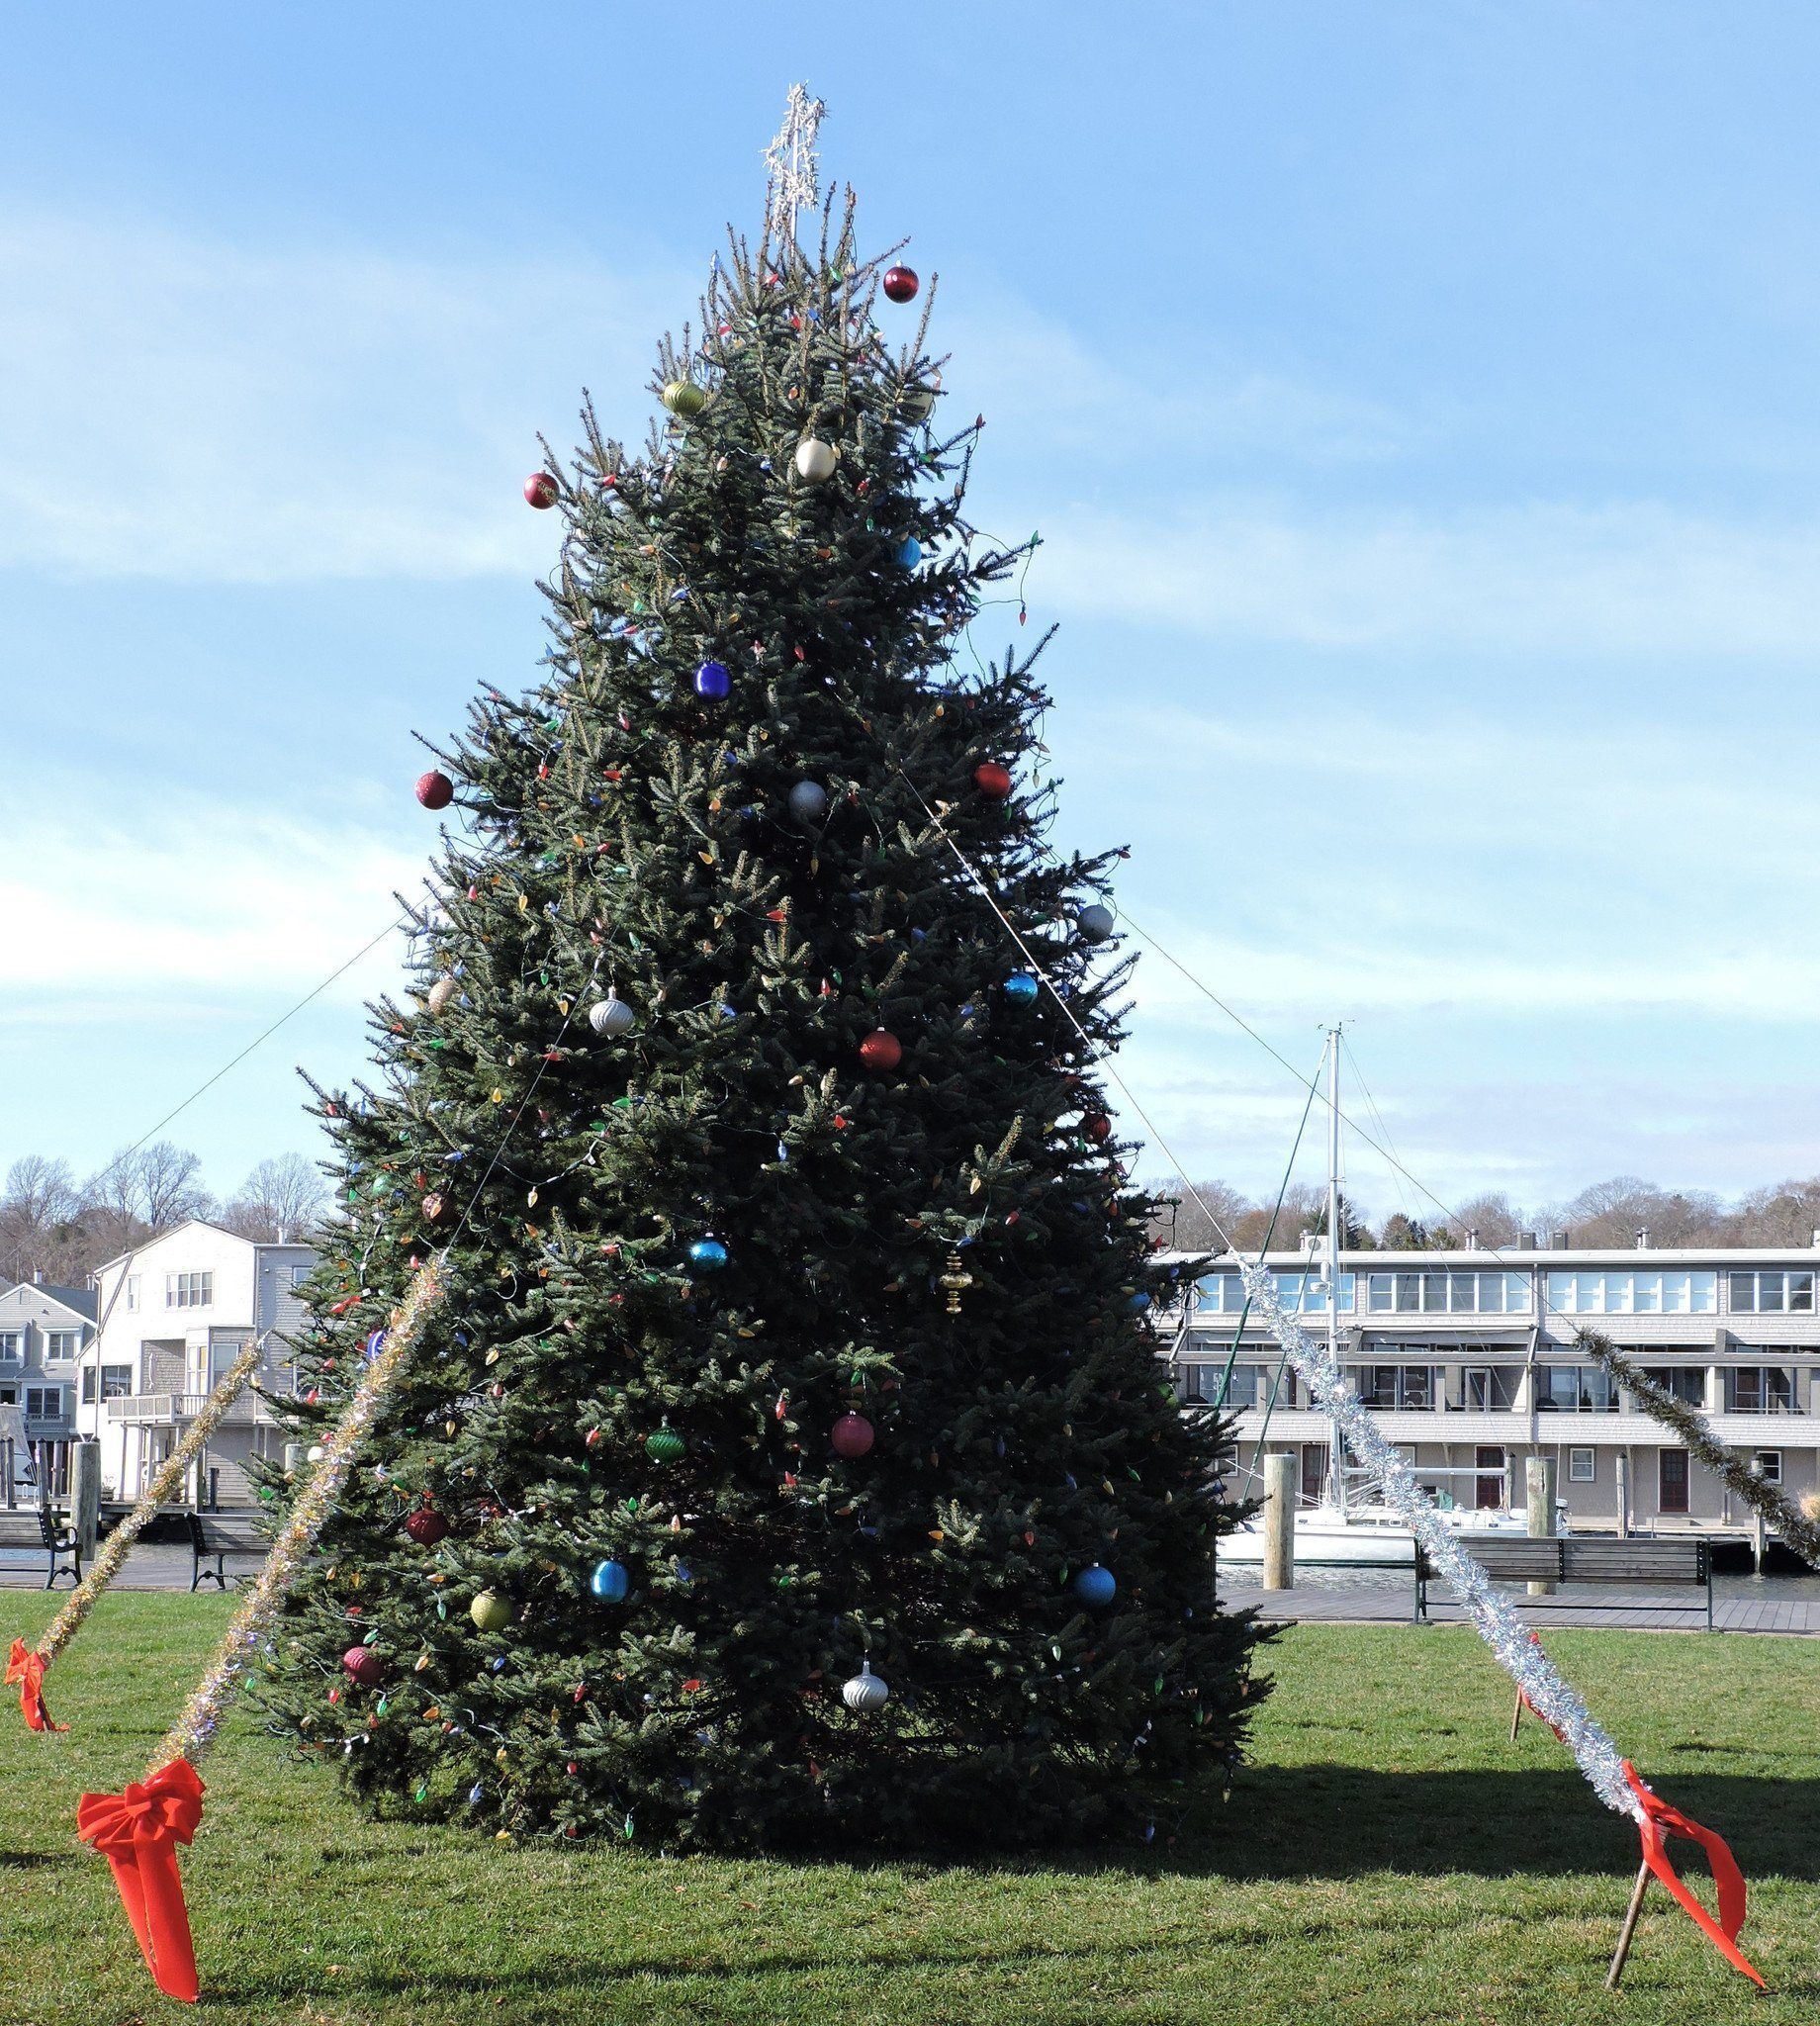 The Holidays in Mystic